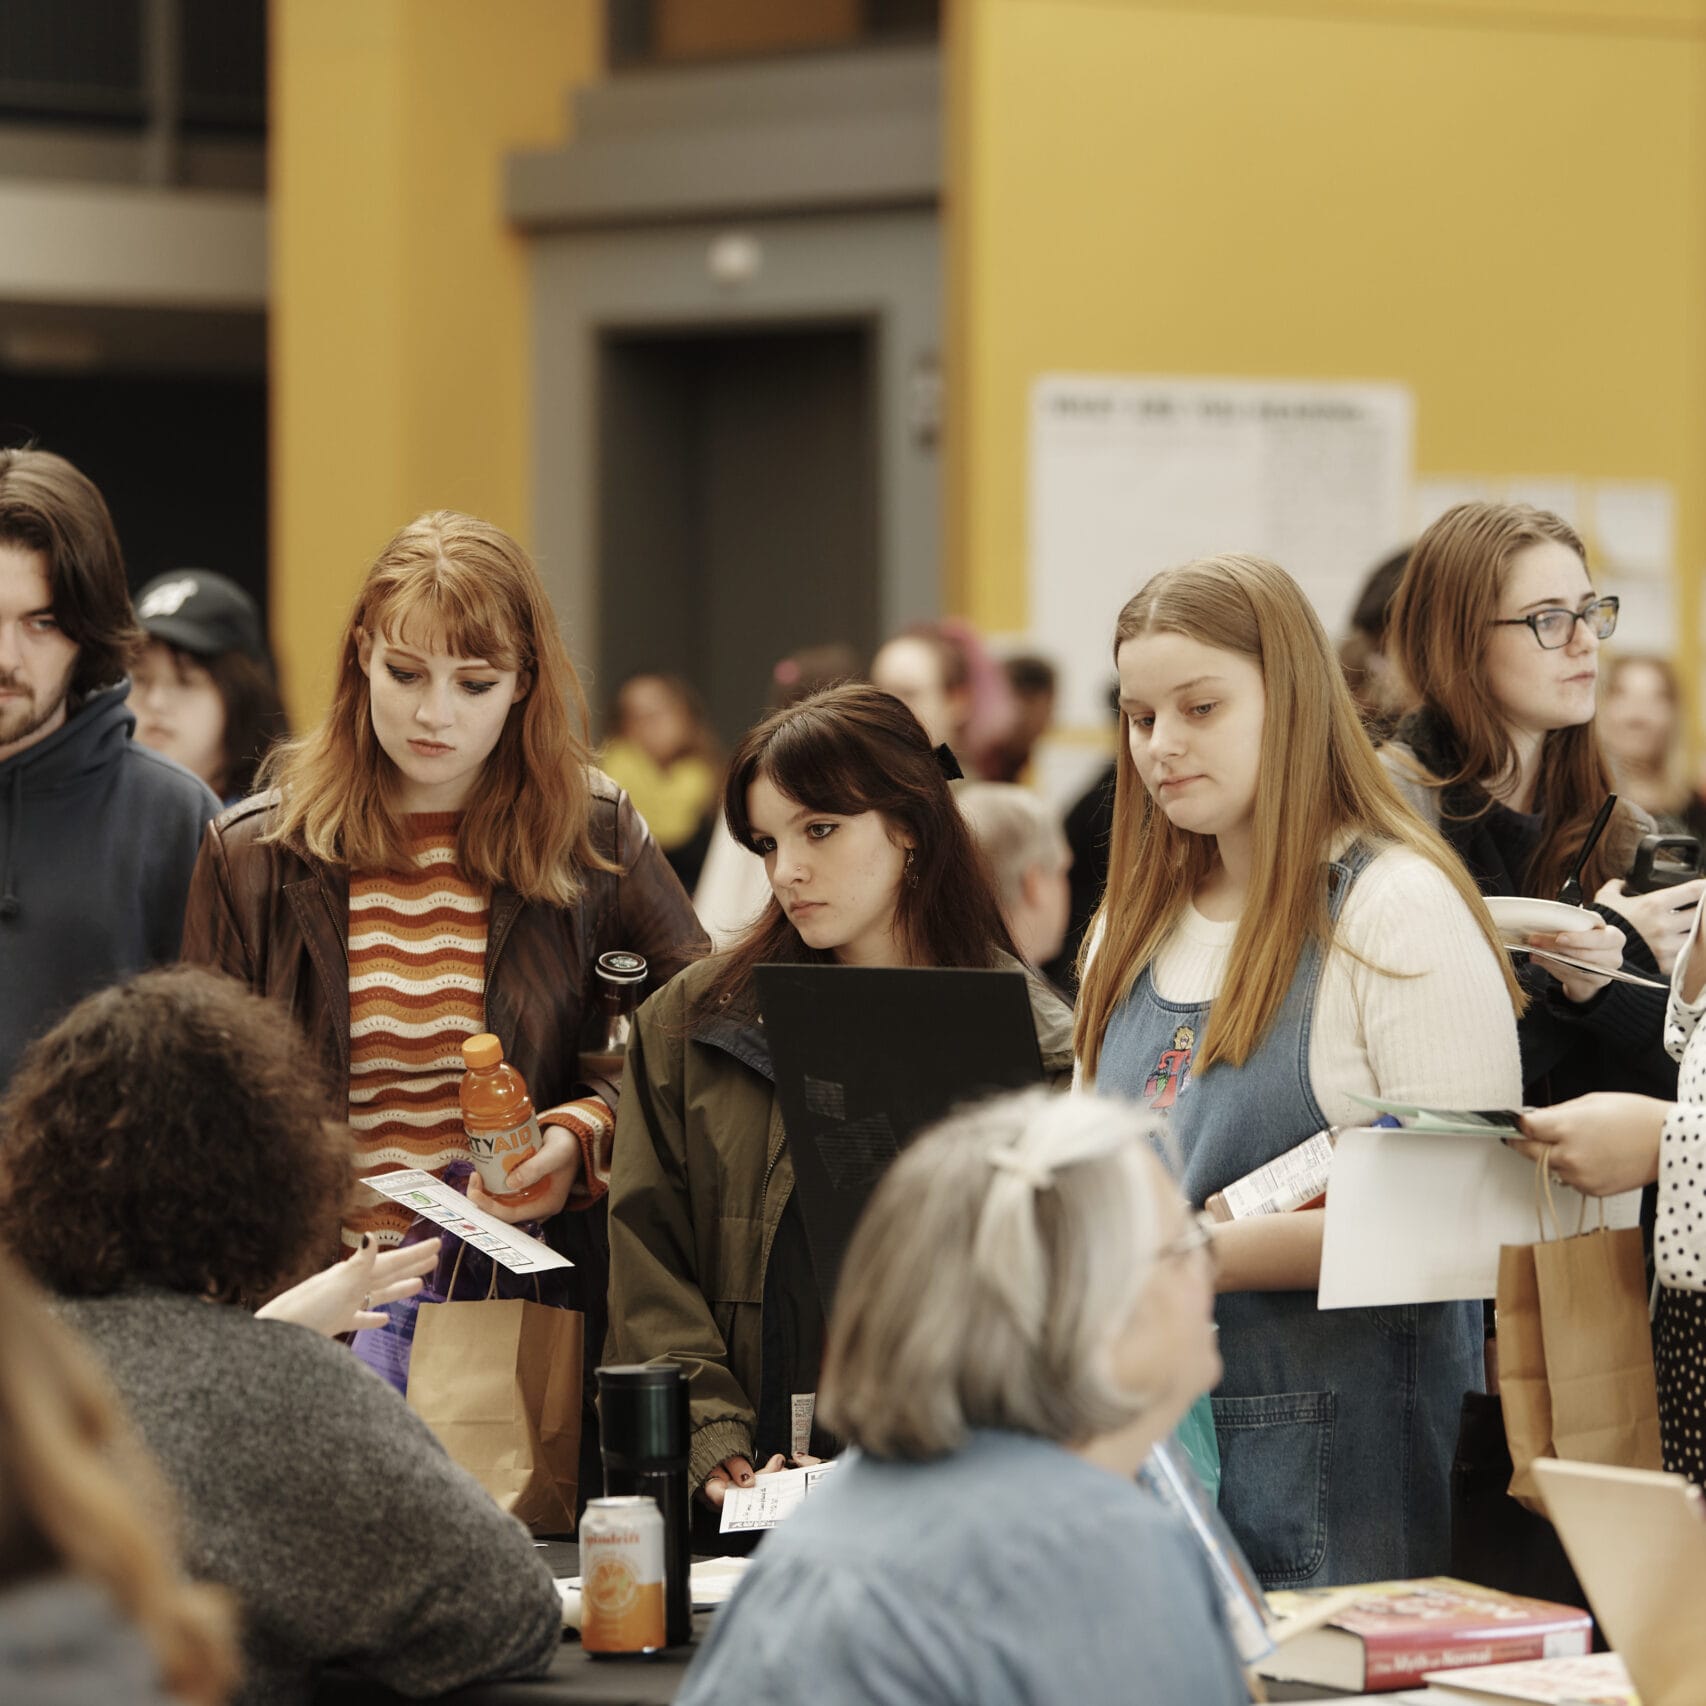 Students stand around a table listening to a staff member speak, at a crowded student fair.